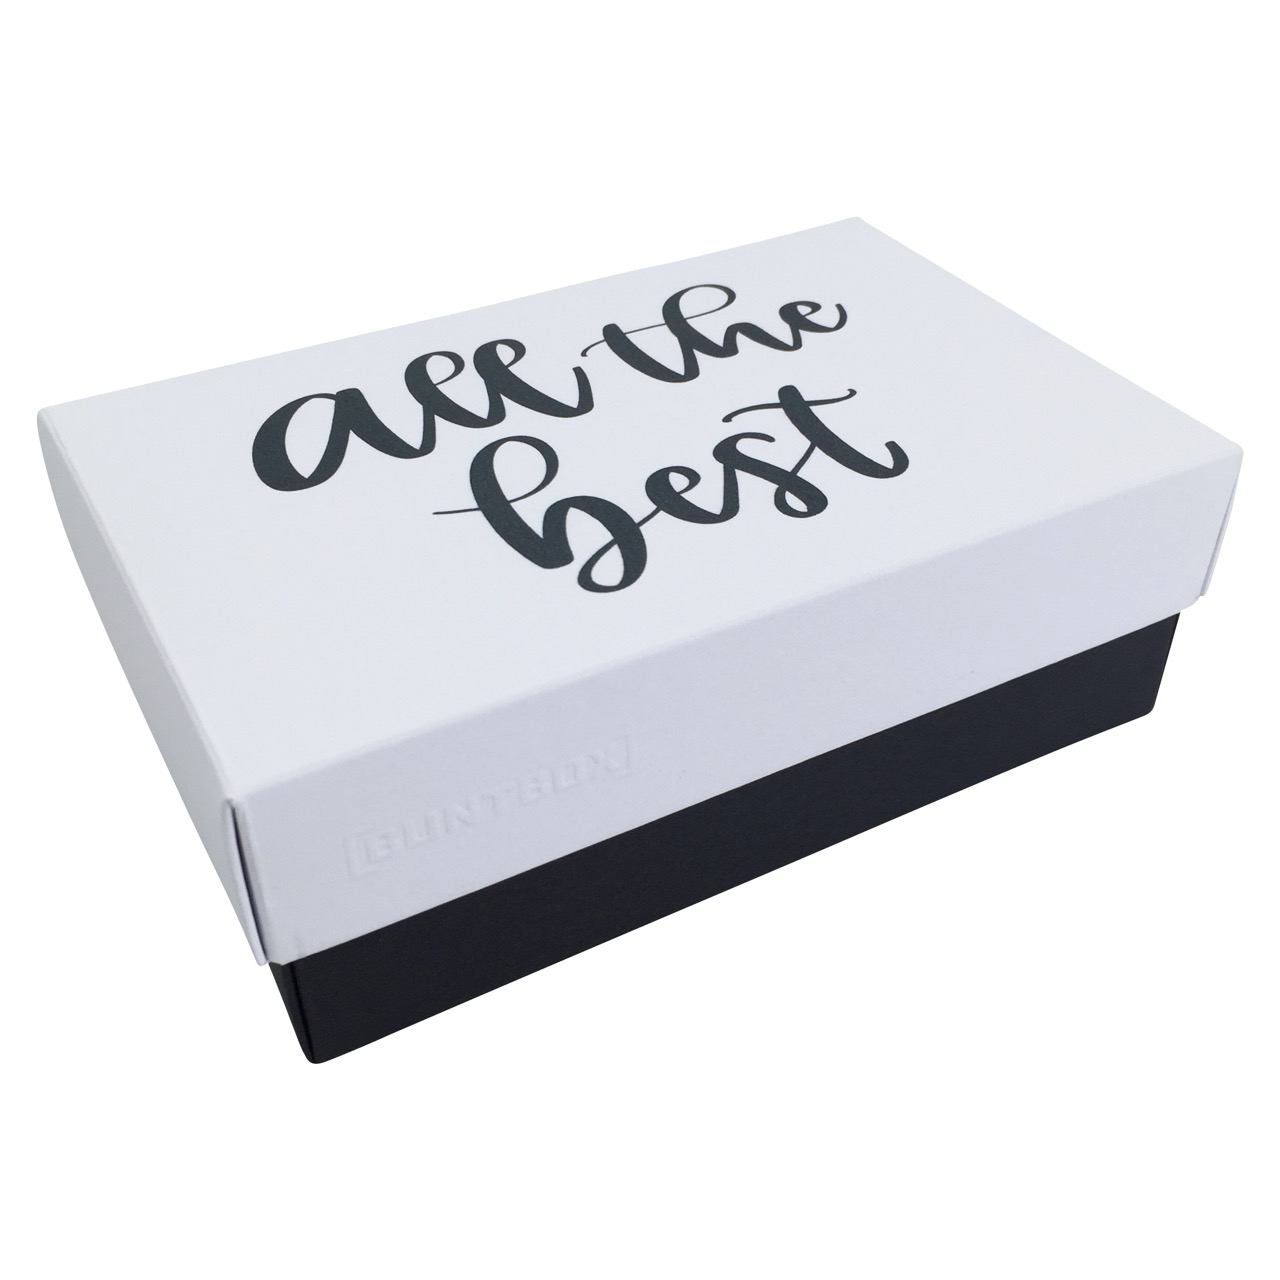 Buntbox S Lettering all the best in Diamant-Graphit